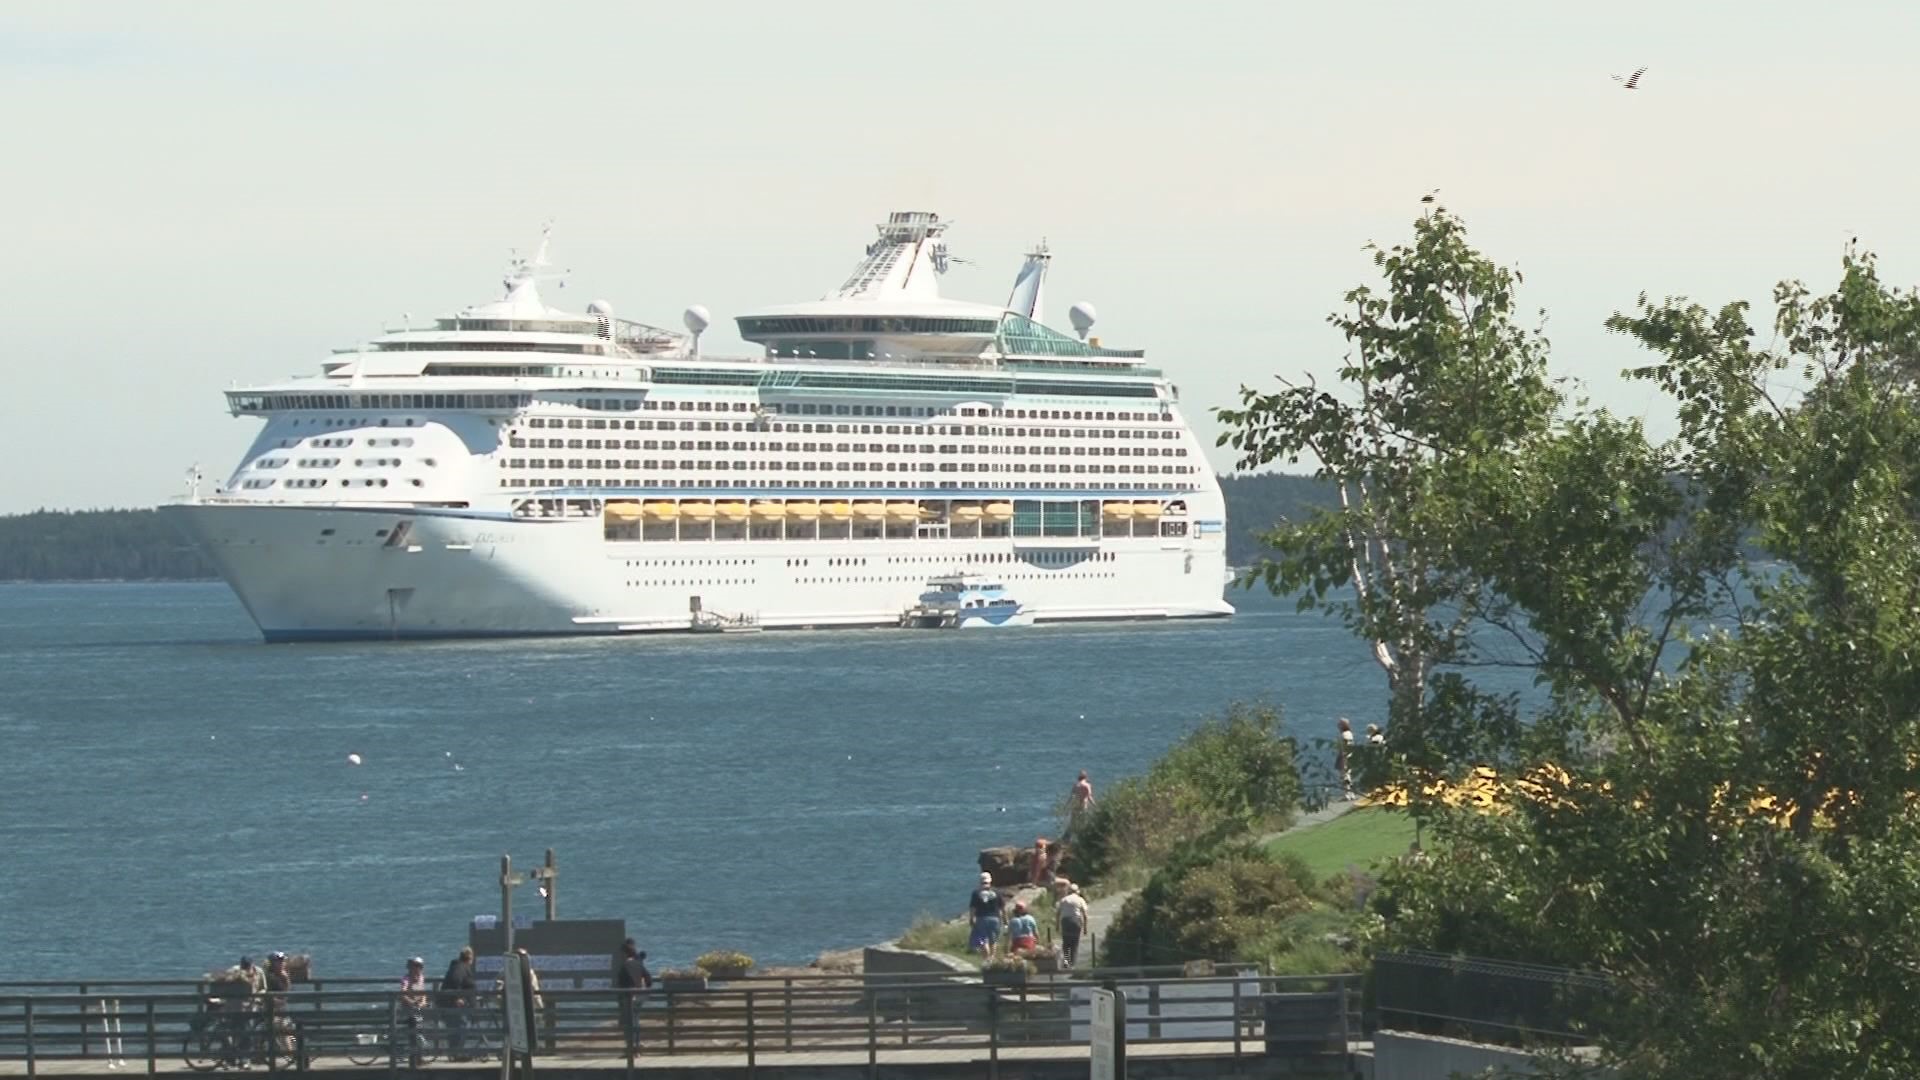 Cruise ship visits on the rise in Maine